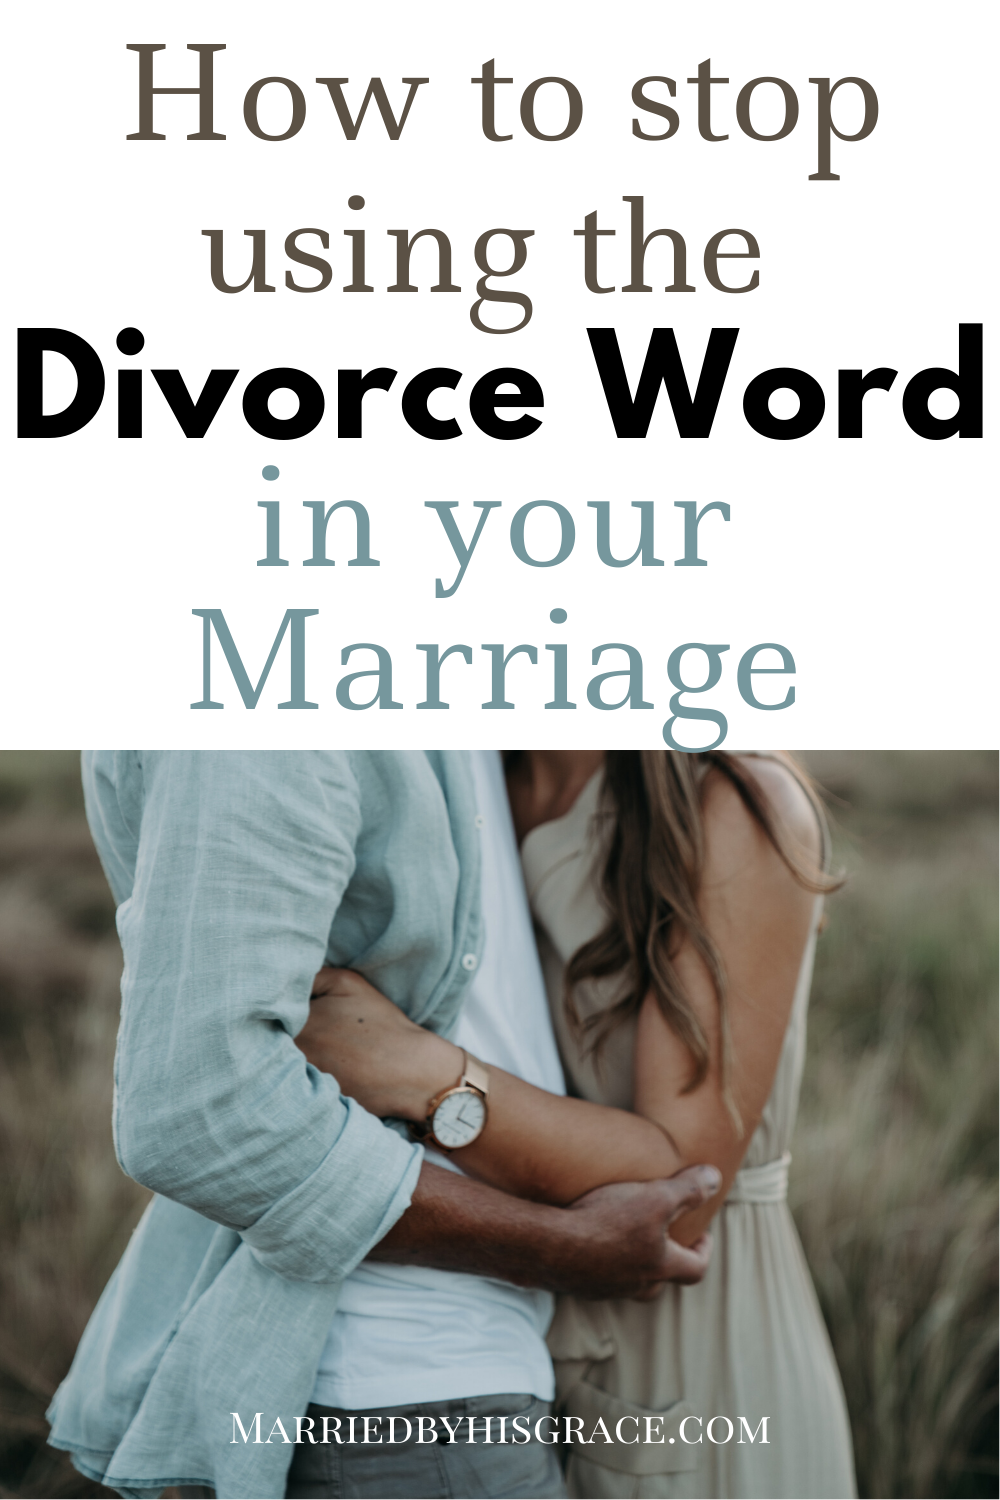 How to stop using the Divorce word in marriage. #marriageadvice